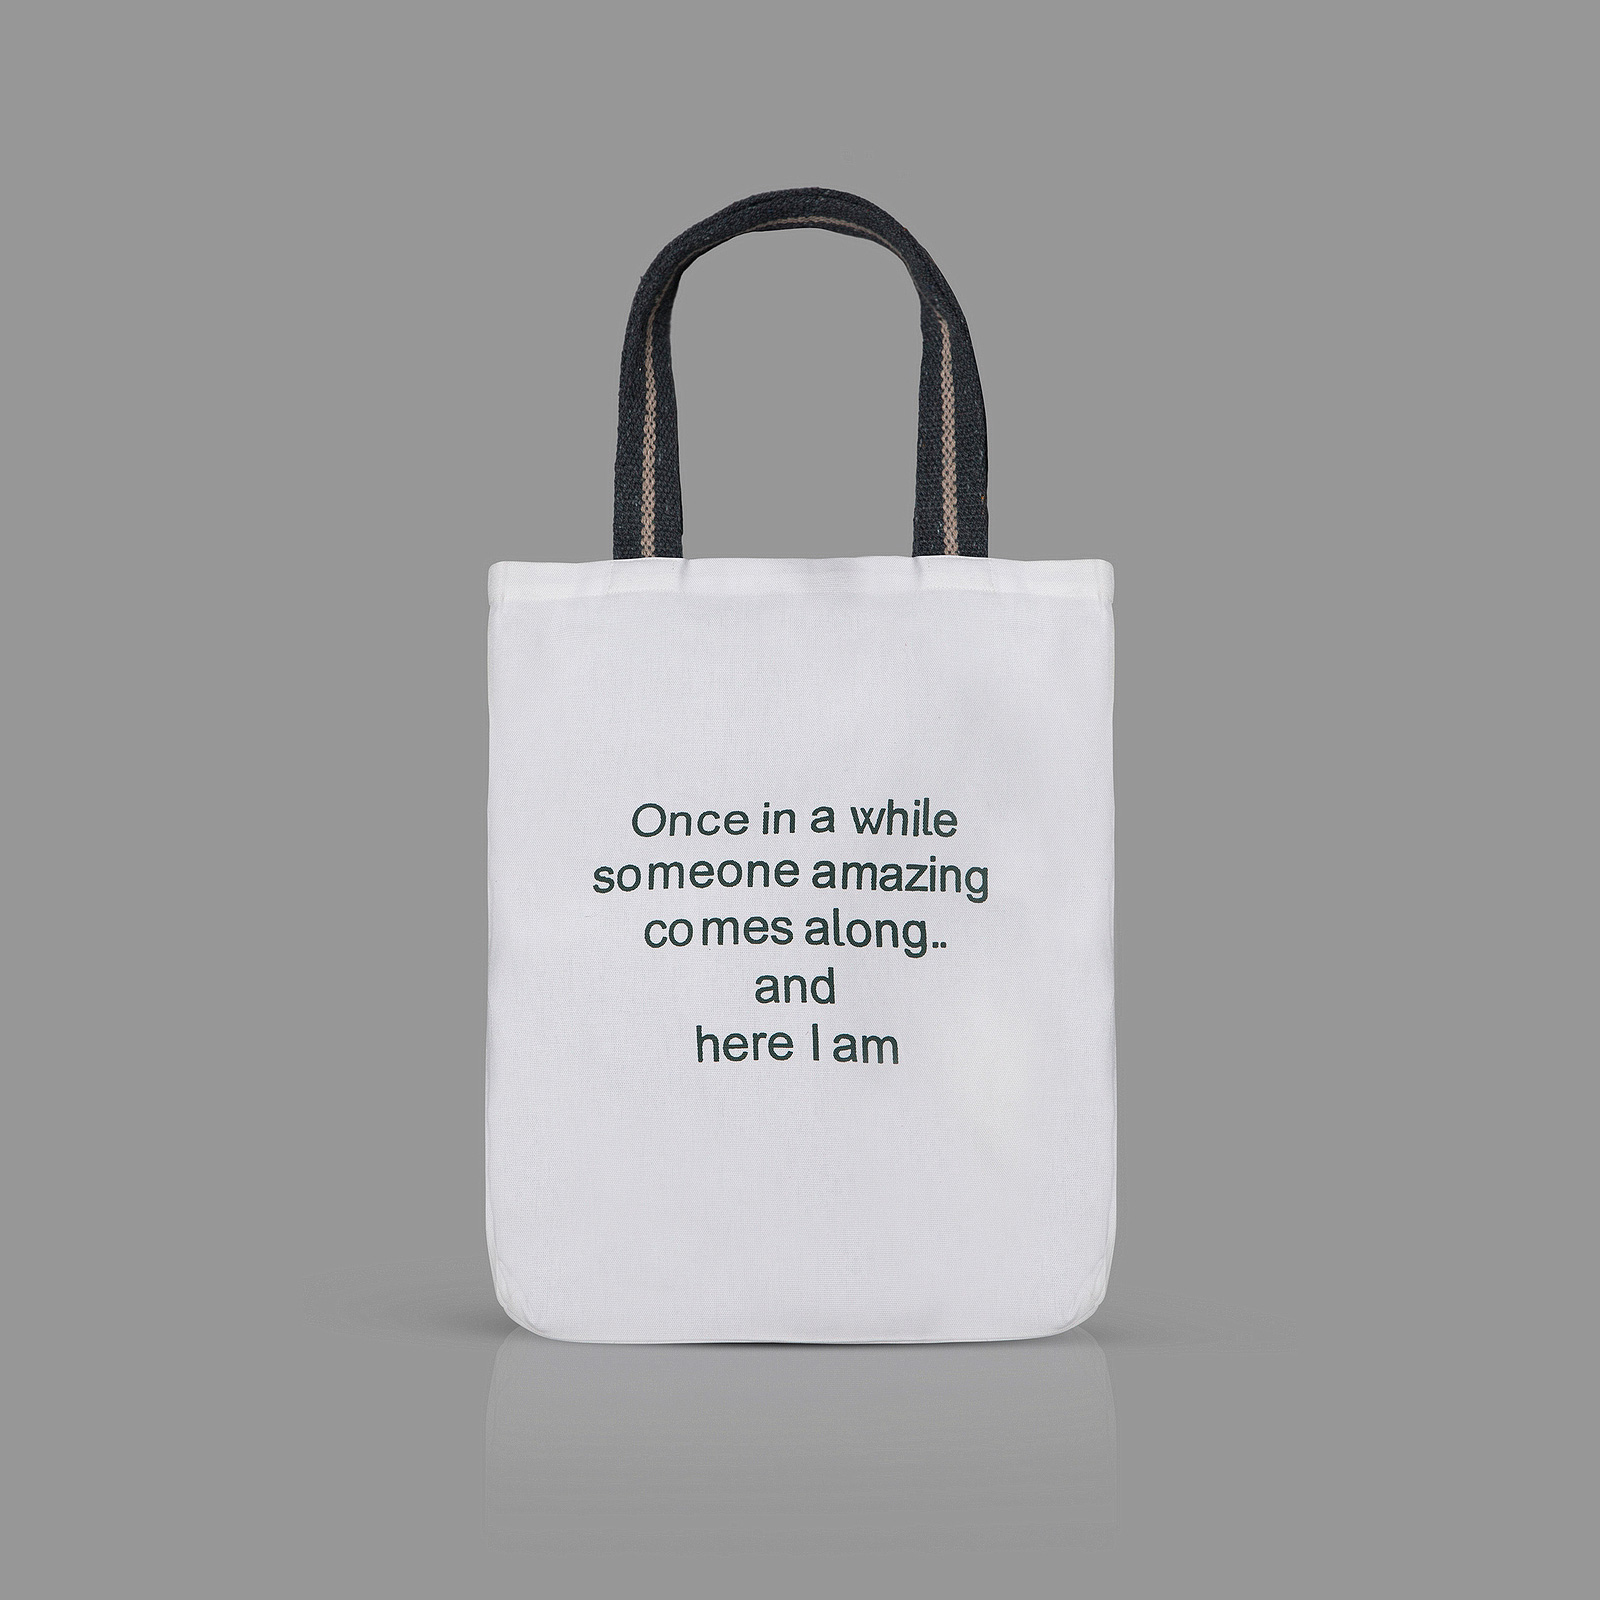 Quotation Totes-plain background-tall